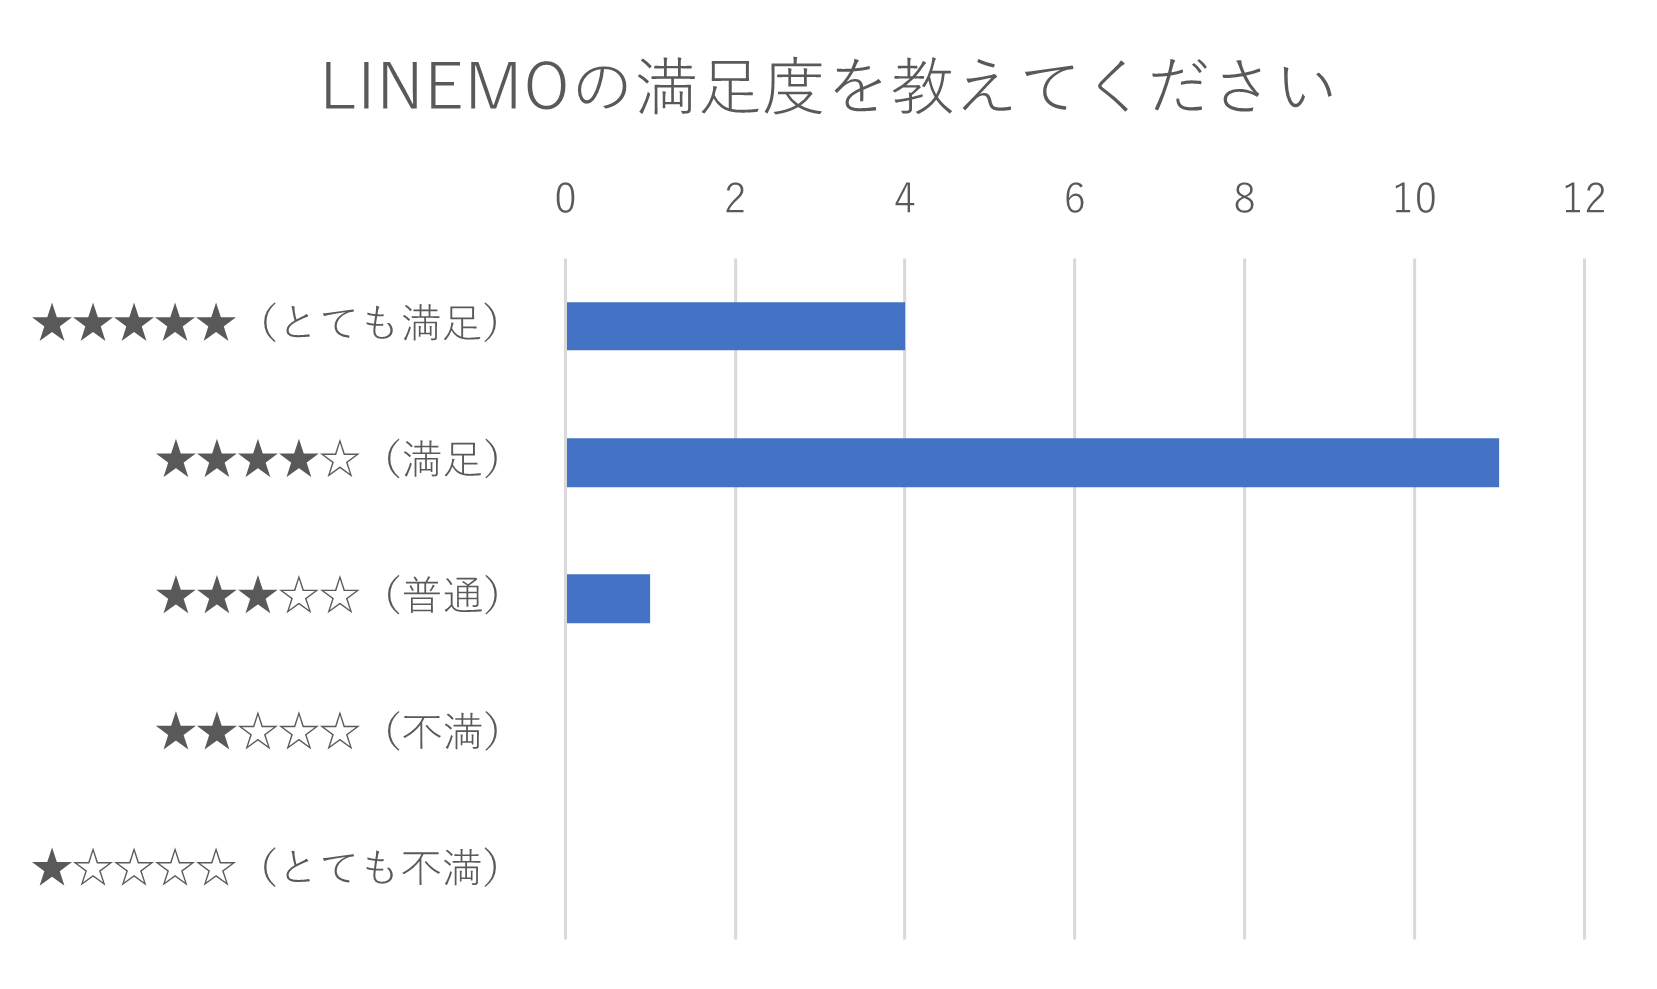 LINEMOの満足度を教えてください